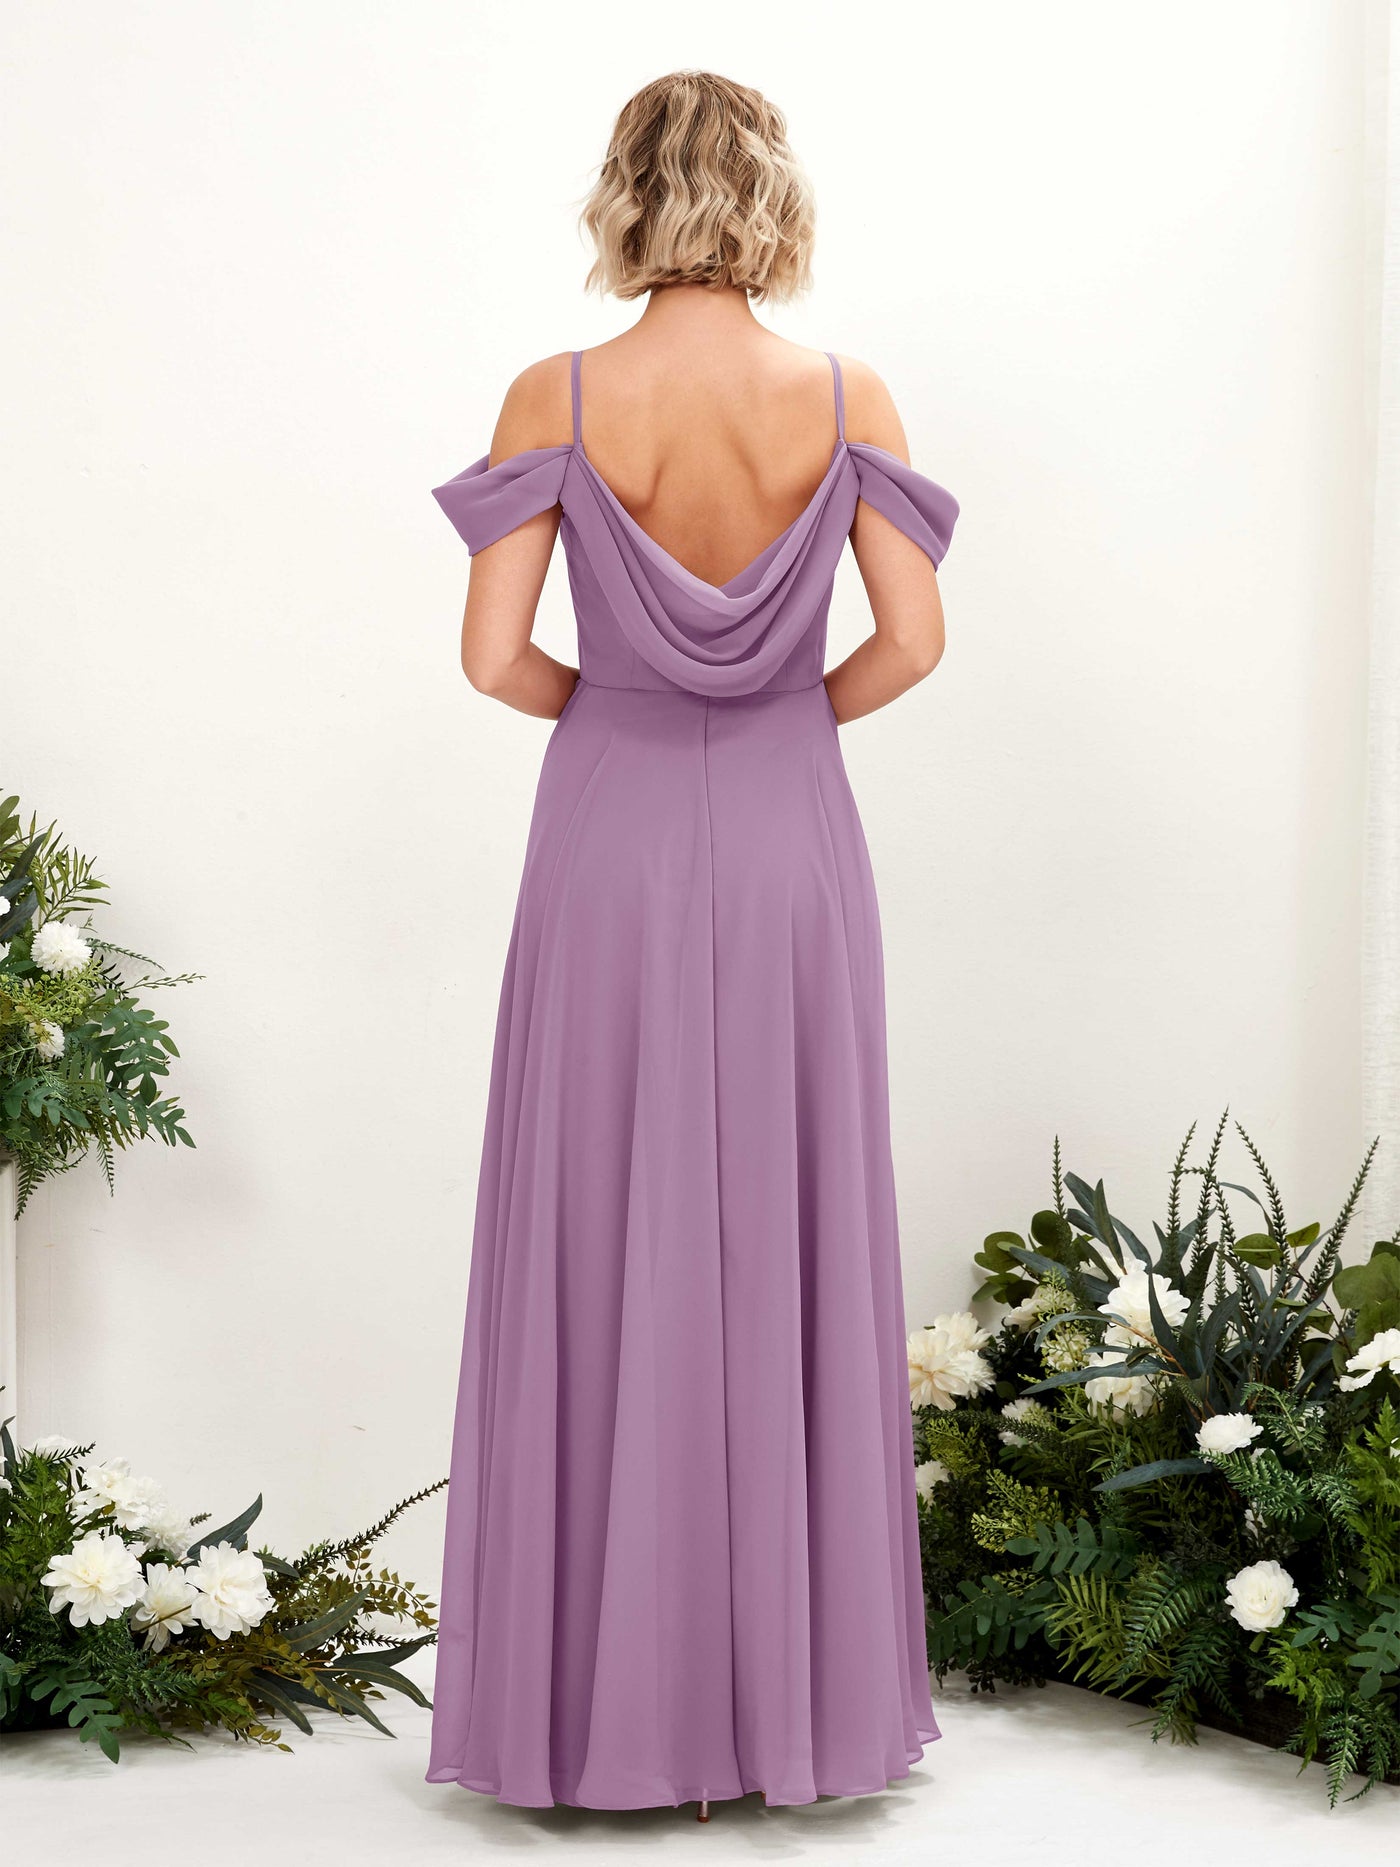 Orchid Mist Bridesmaid Dresses Bridesmaid Dress A-line Chiffon Off Shoulder Full Length Sleeveless Wedding Party Dress (81224921)#color_orchid-mist